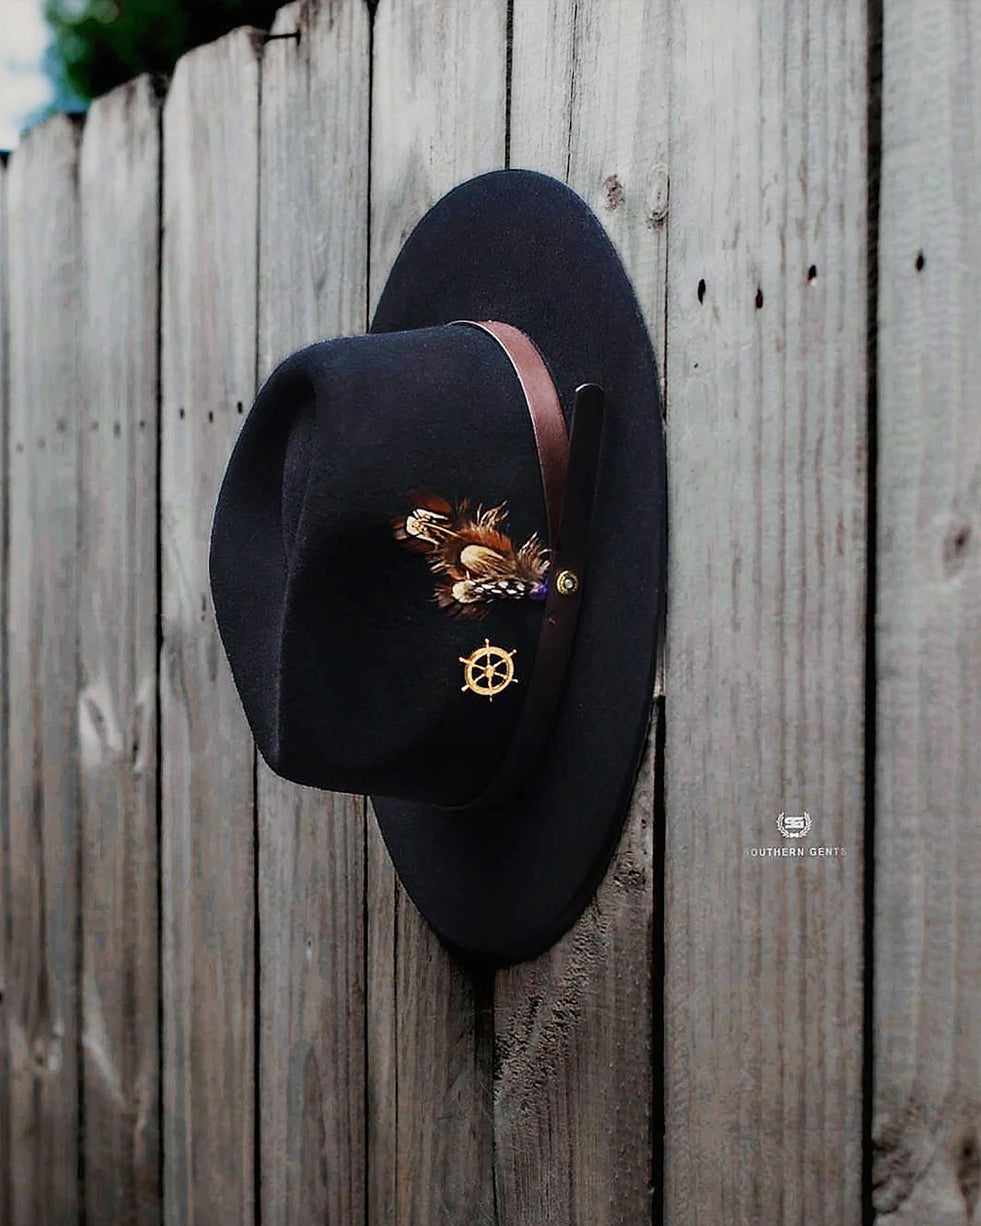 Hats – Southern Gents